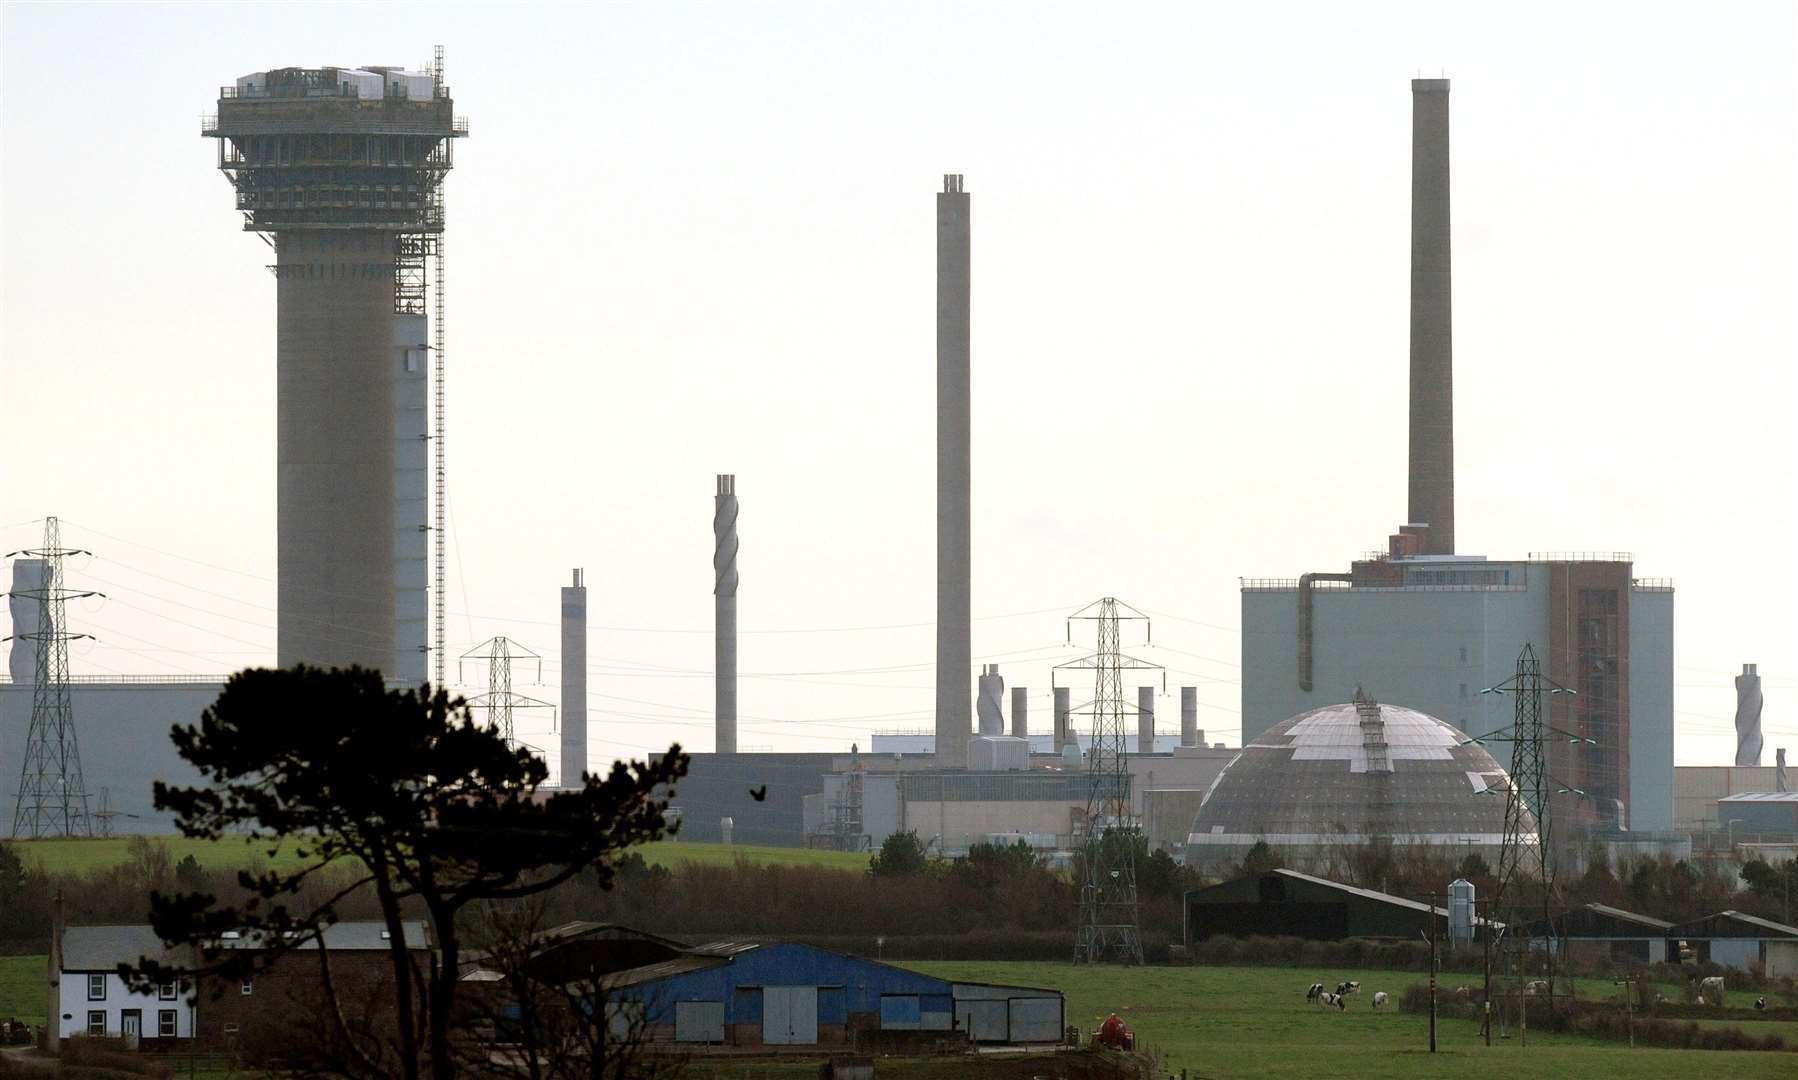 The site is run by Sellafield Ltd under the control of the Government’s Nuclear Decommissioning Authority (PA)